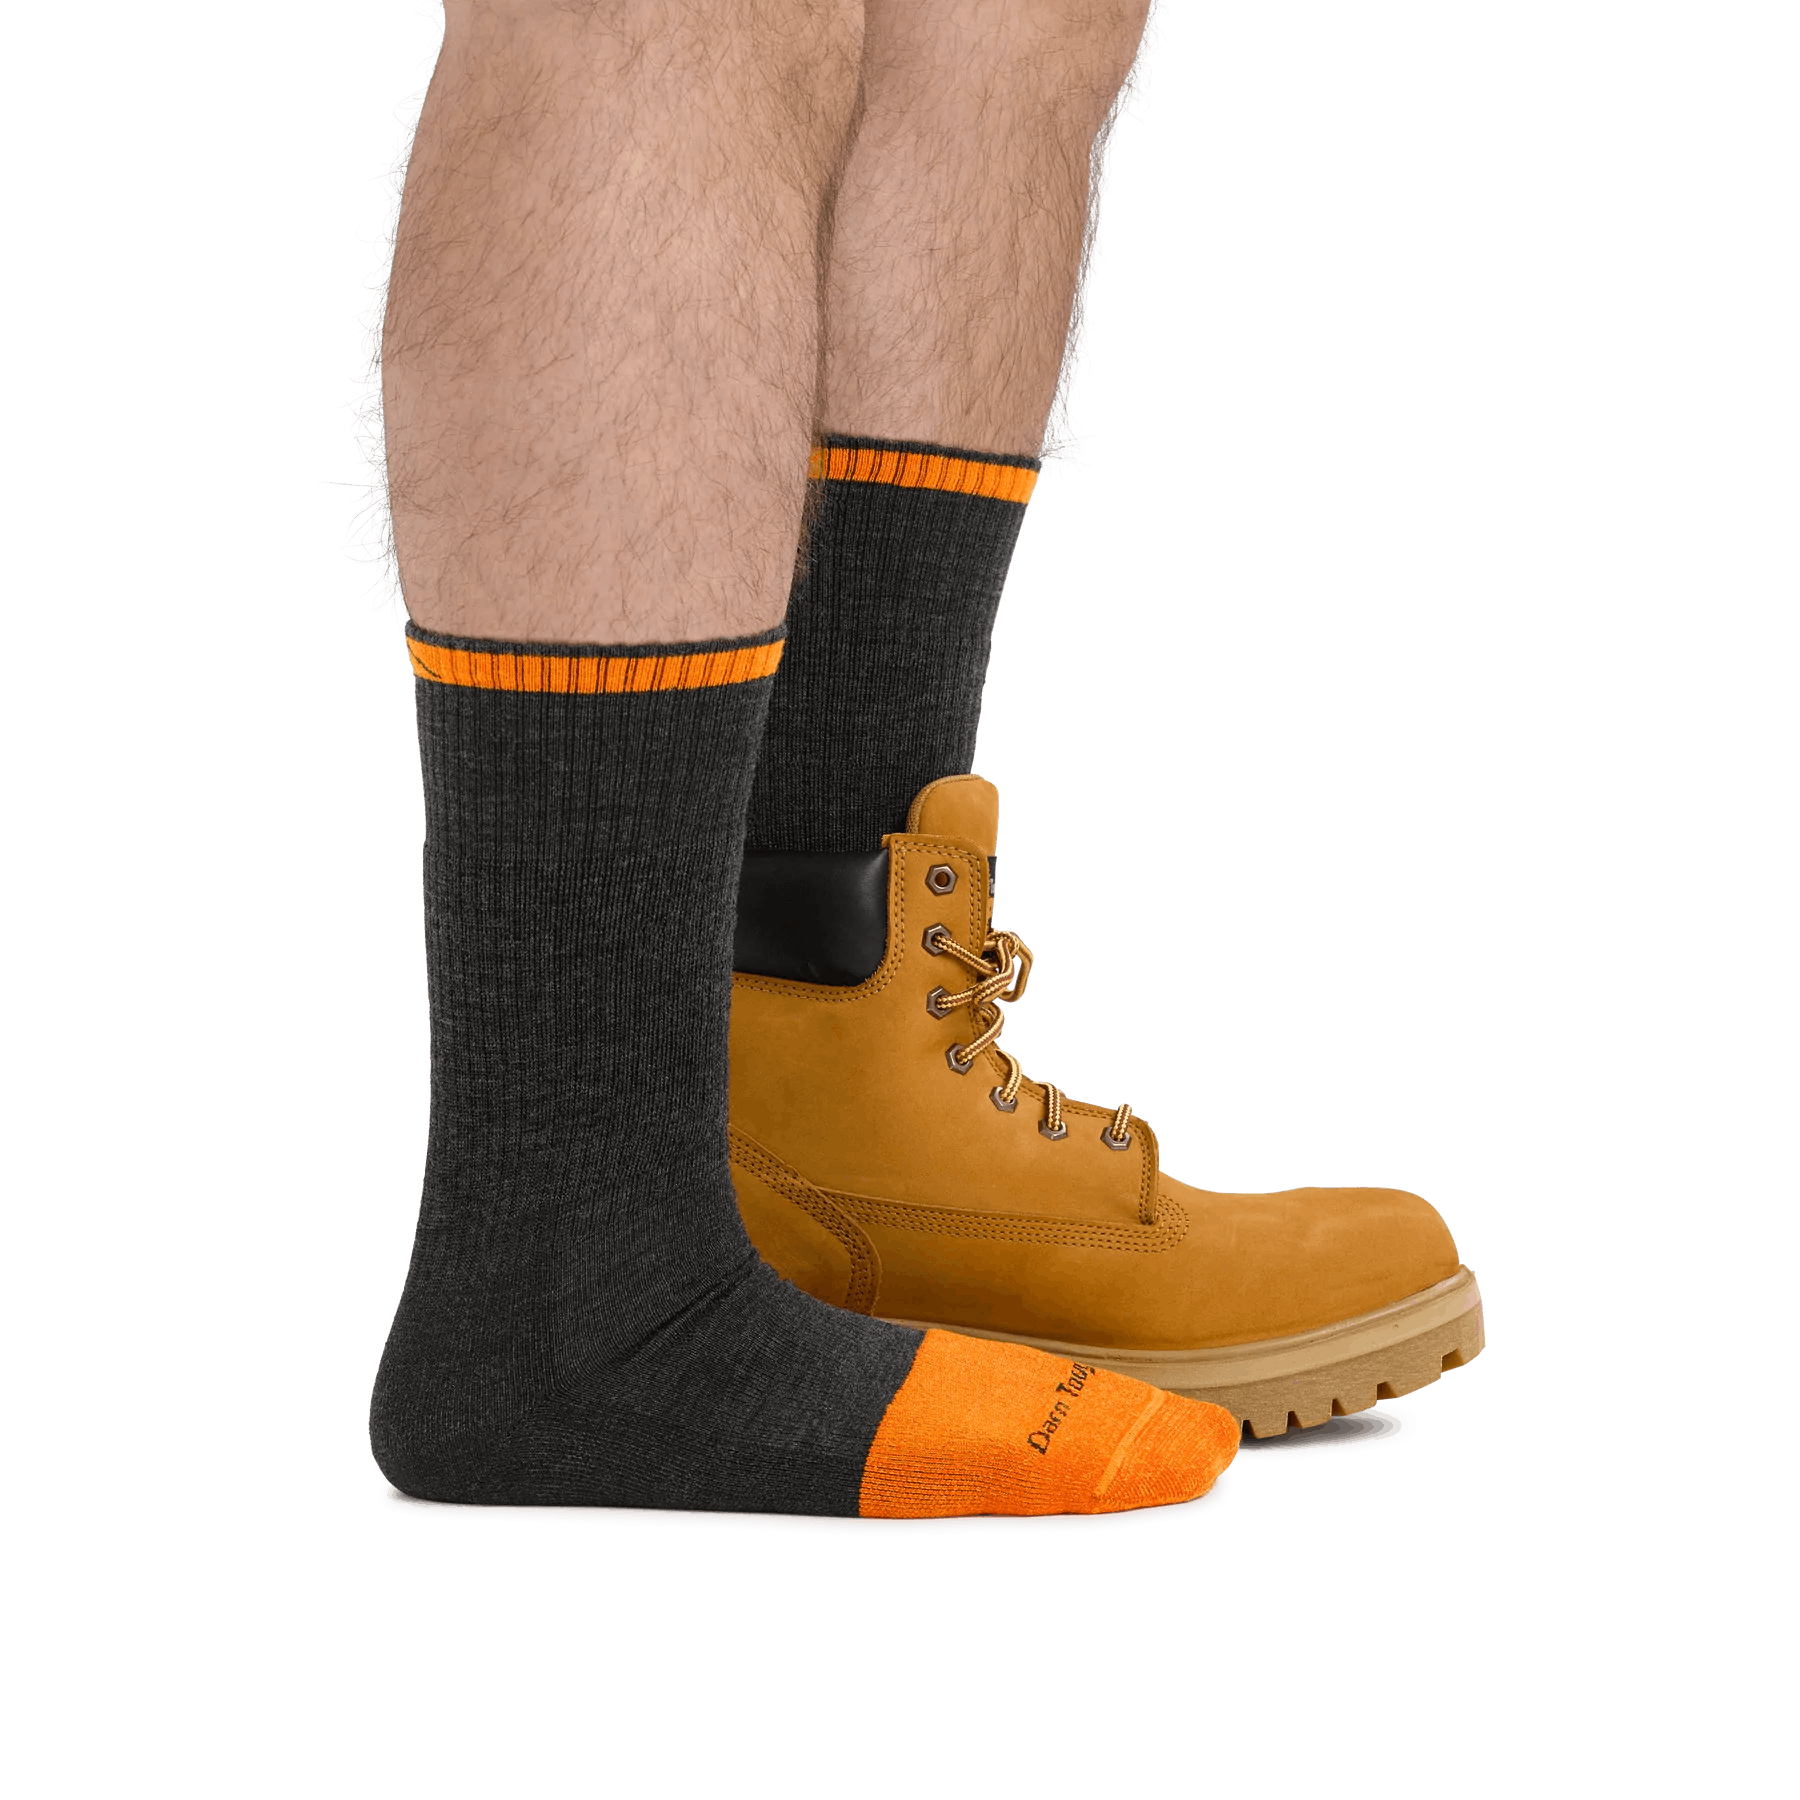 Darn Tough Men's Steely Boot Midweight Work Socks with Full Cushion Toe Box